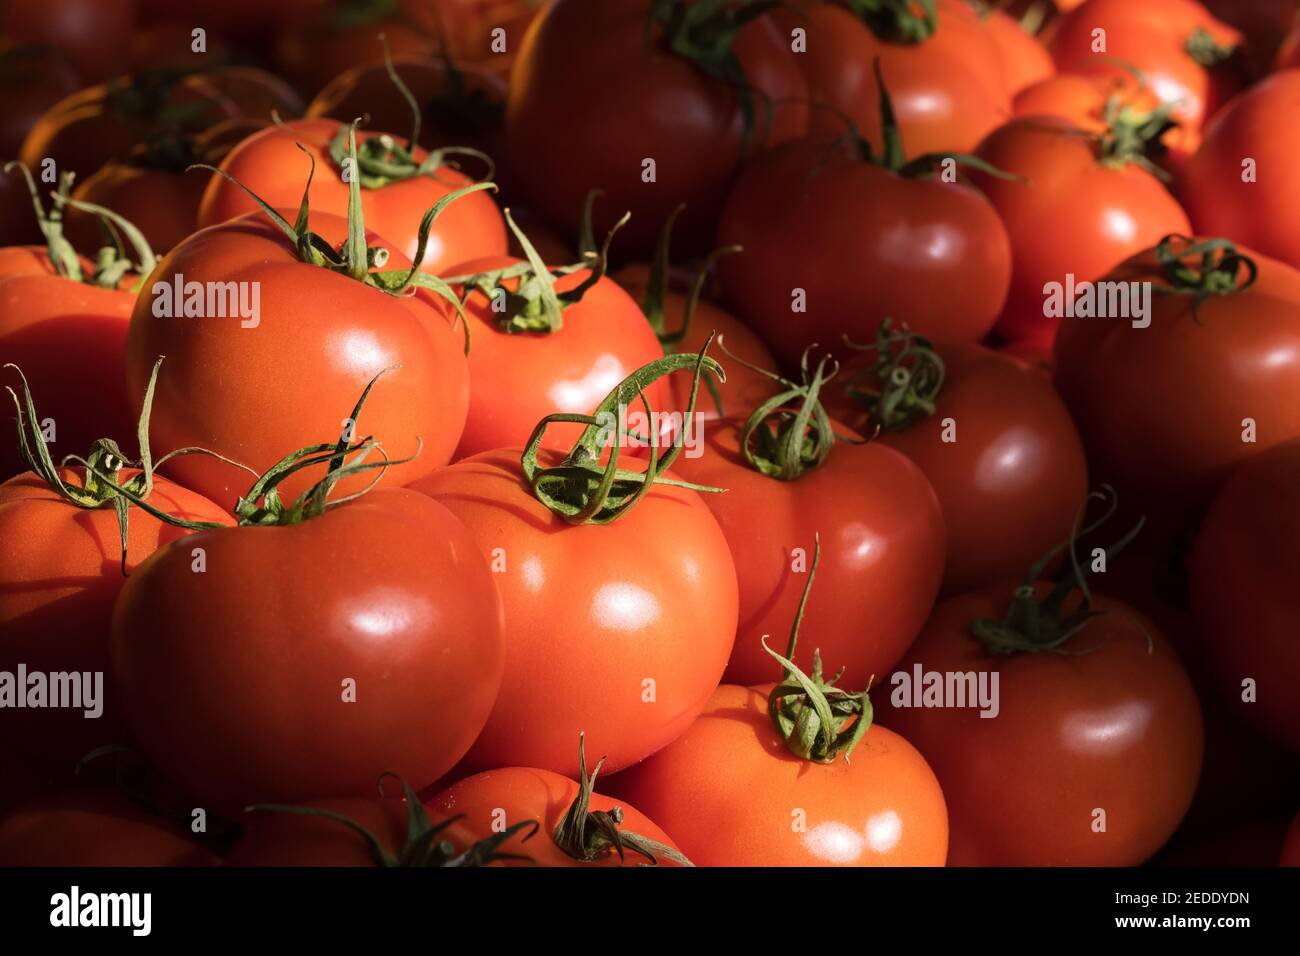 Delicious red tomatoes close-up at summer farmers market. Stock Photo